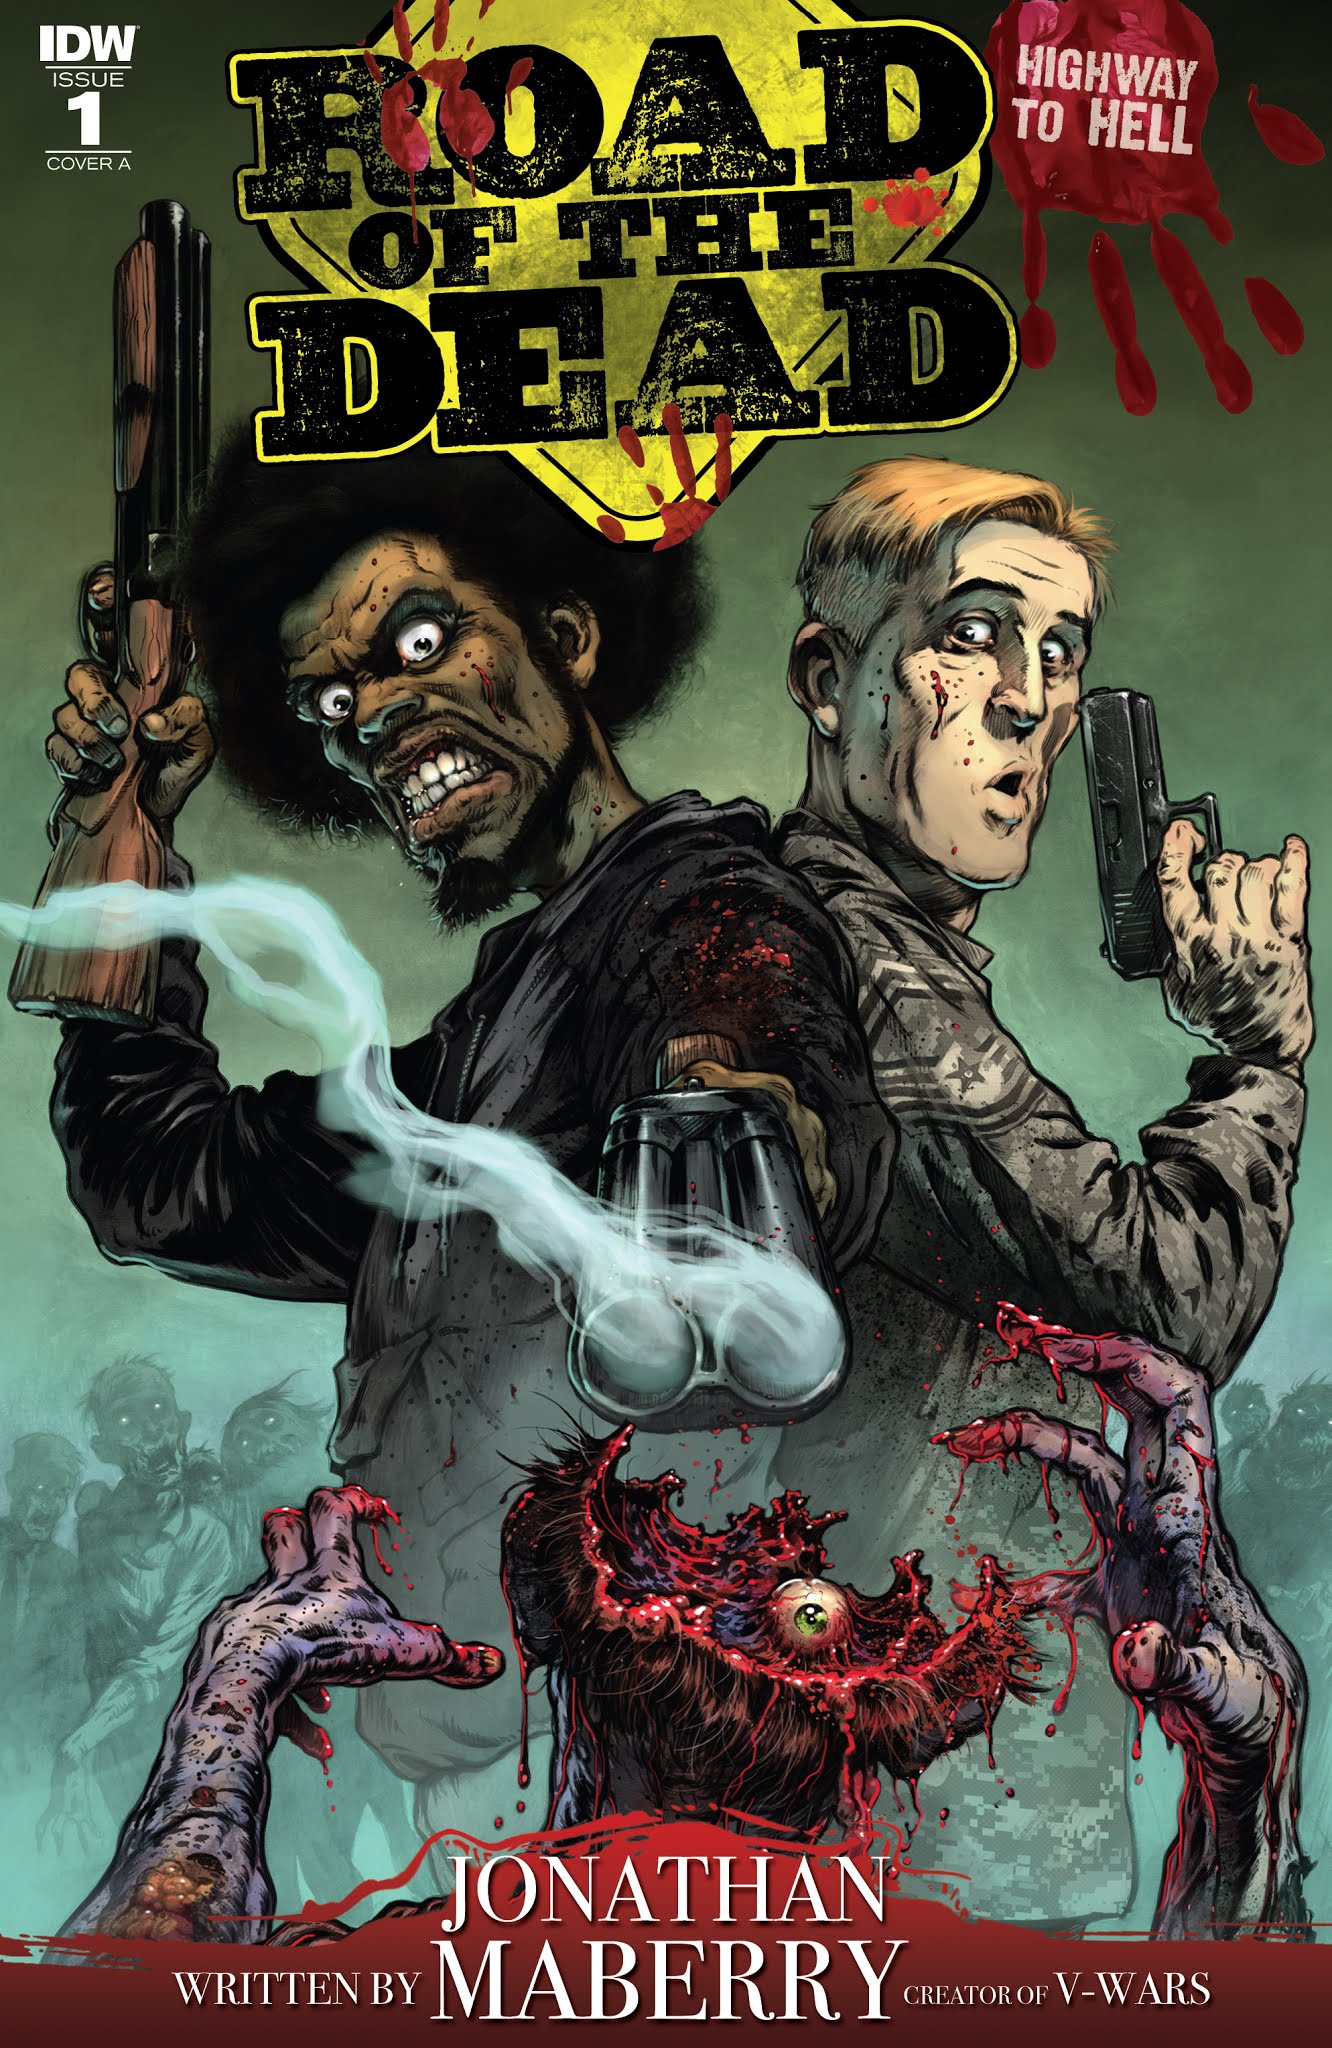 Read online Road of the Dead: Highway To Hell comic -  Issue #1 - 1